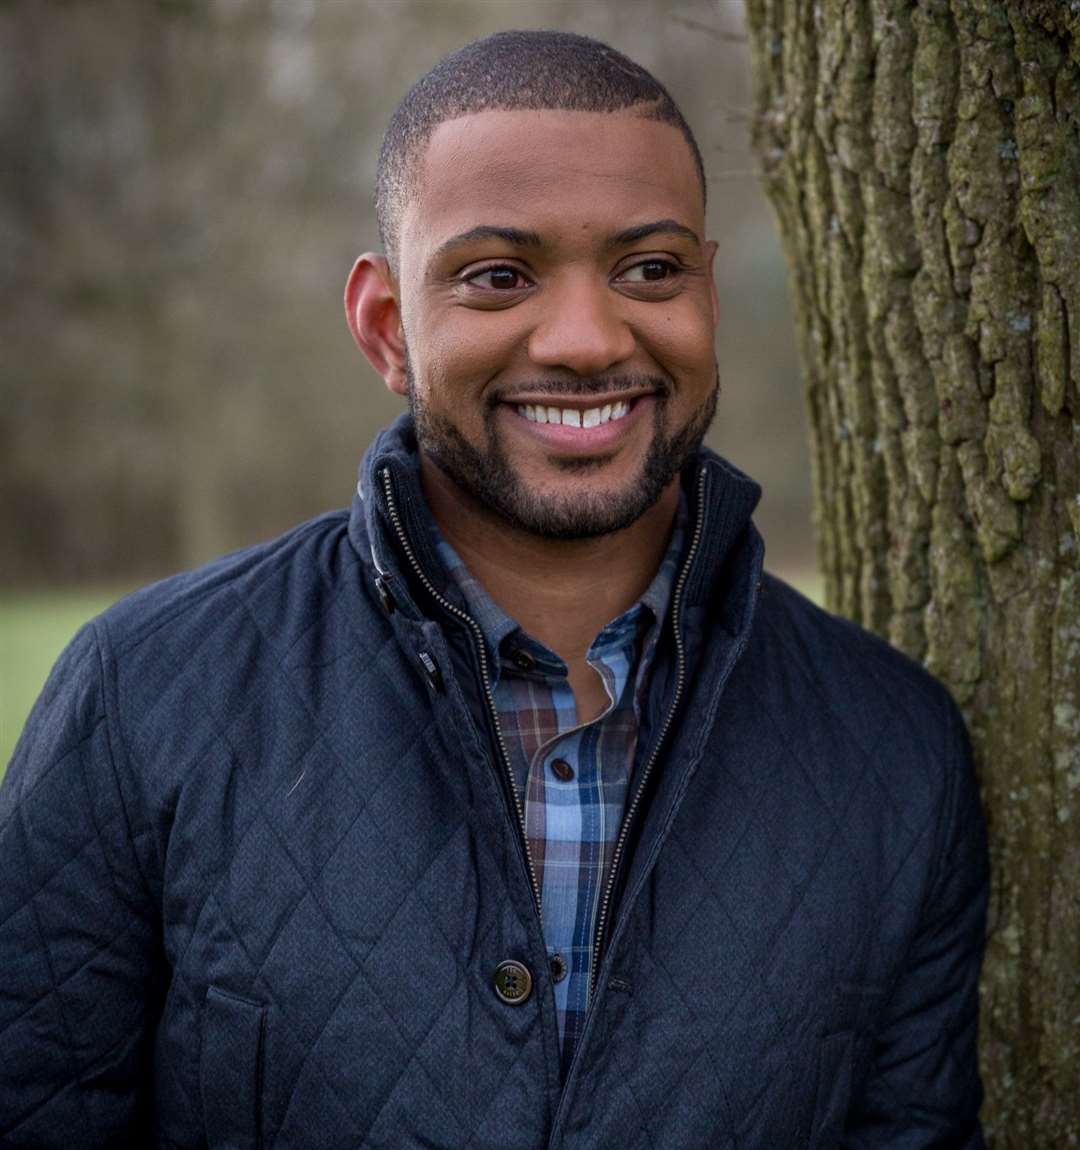 JB Gill now lives in Kent